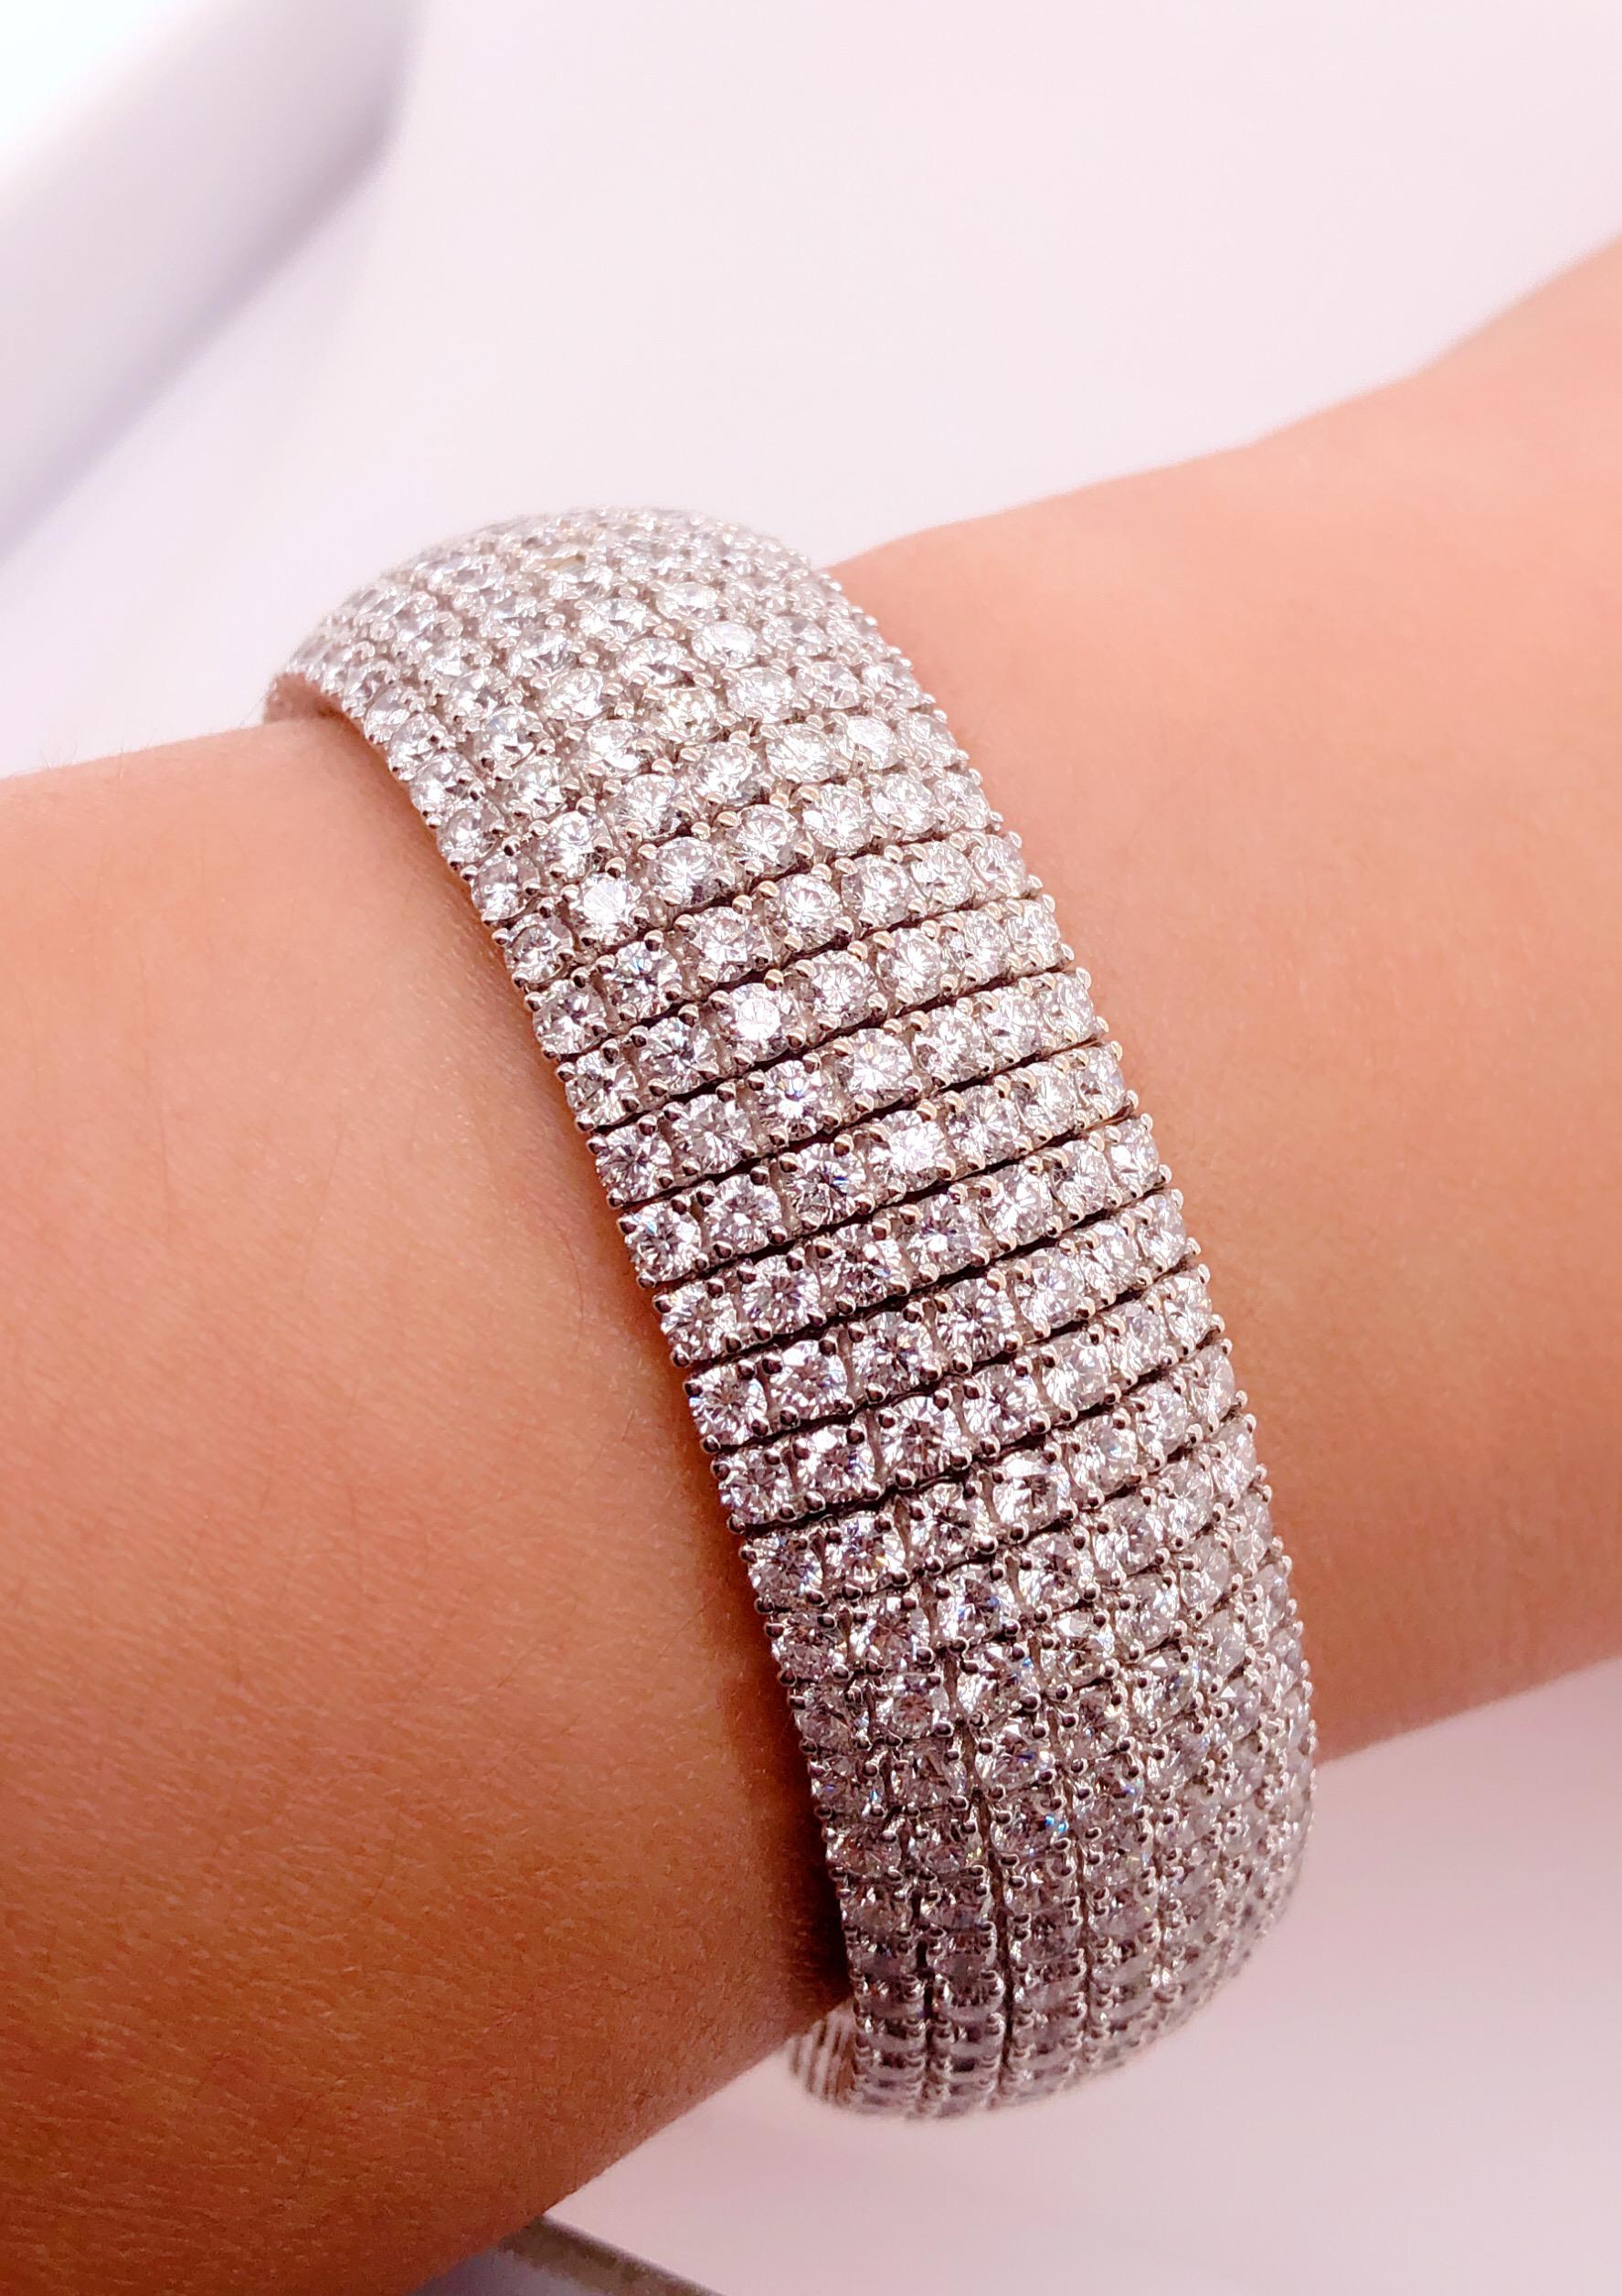 18 Karat White Gold and Diamond Cuff Bracelet Weighing Approx 32.89 Carat For Sale 5